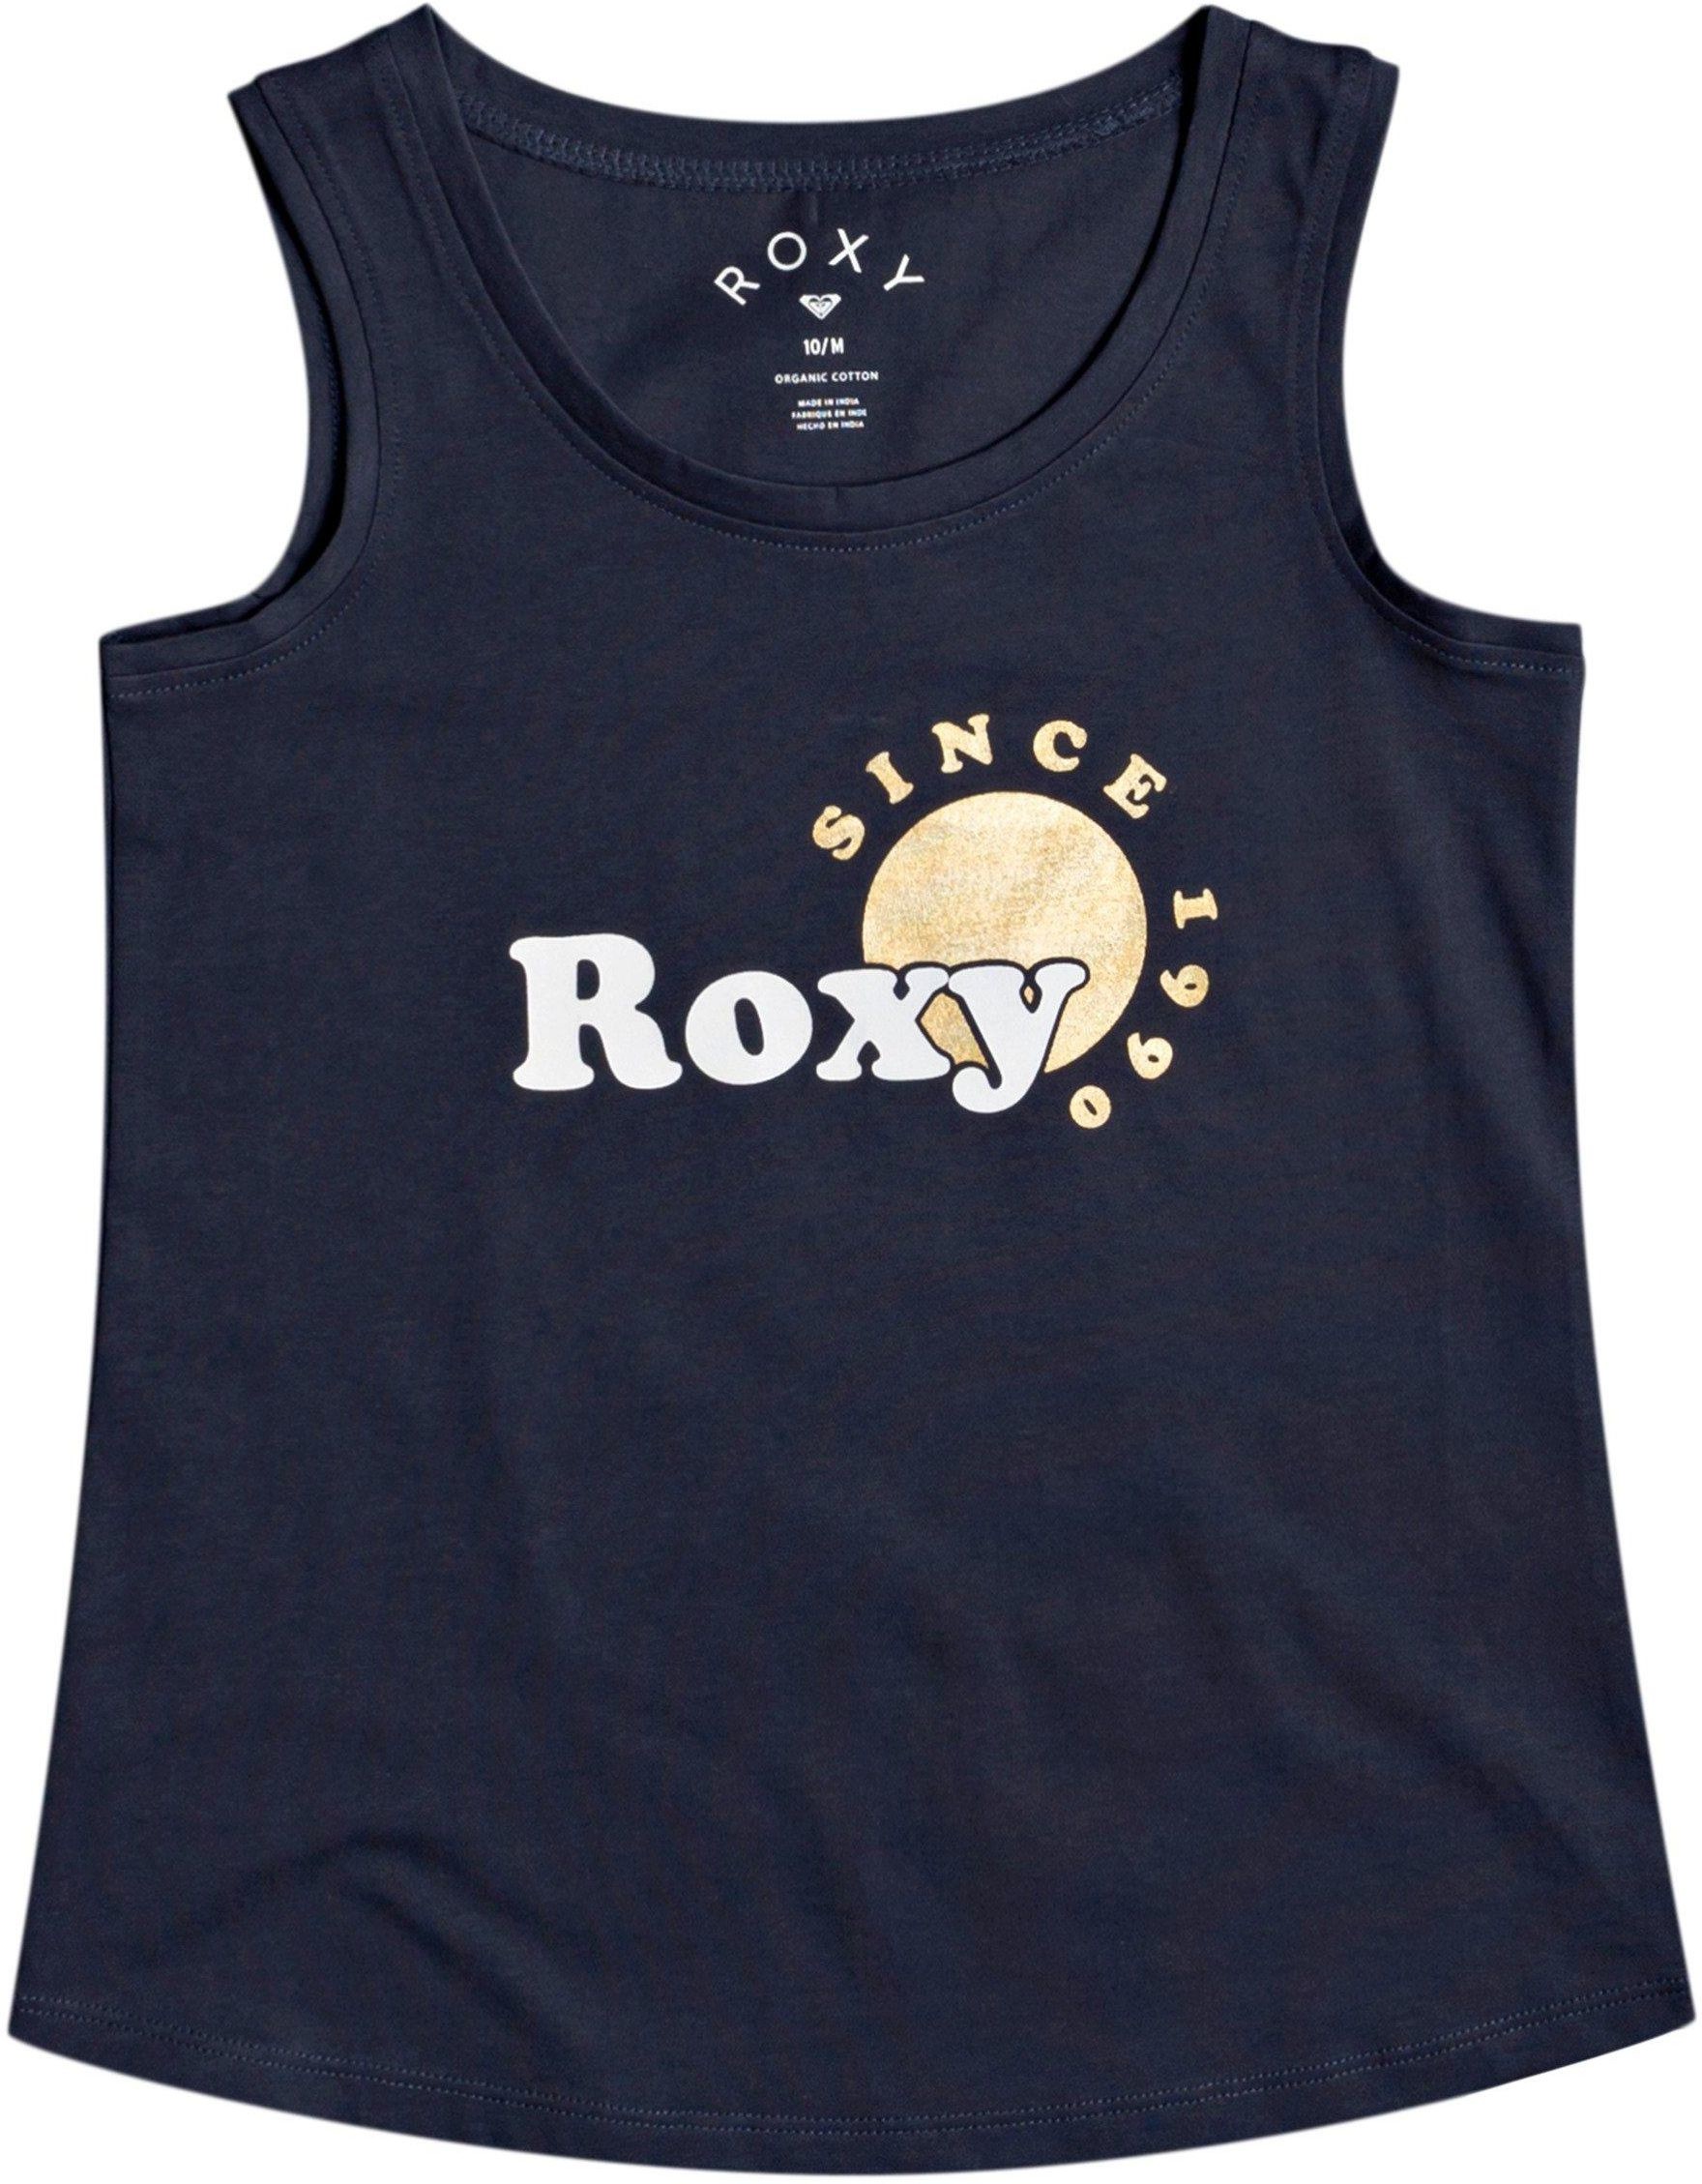 Roxy top YOUTH THERE IS LIFE TANK Mood Indigo BSP0